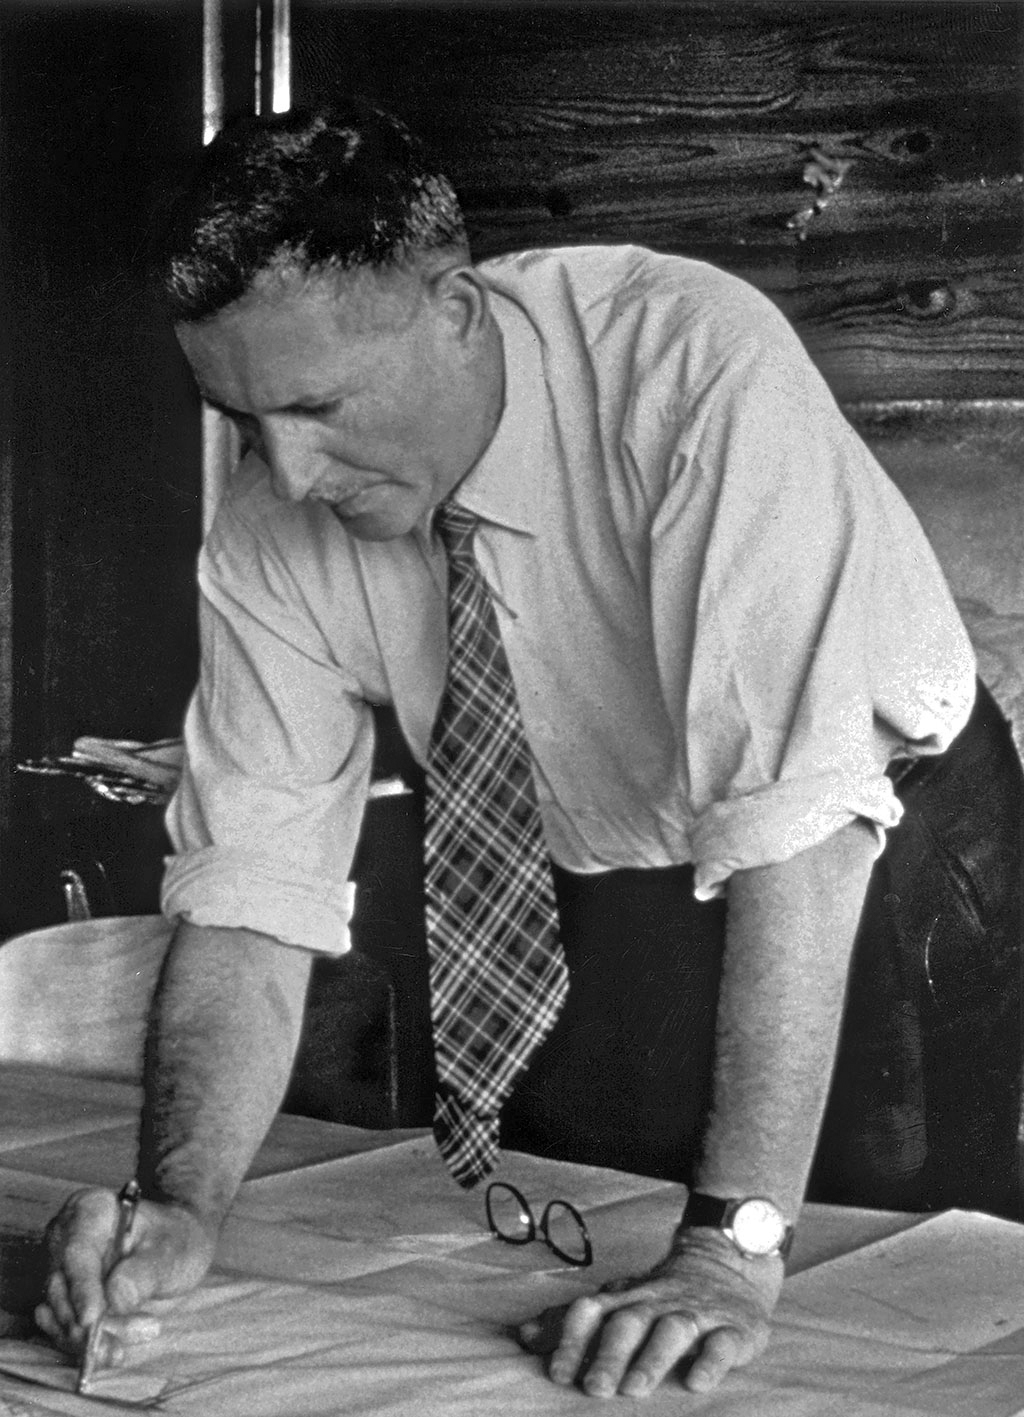 Jean Prouvé in his office at the Ateliers Jean Prouvé, Maxéville, ca. 1955.